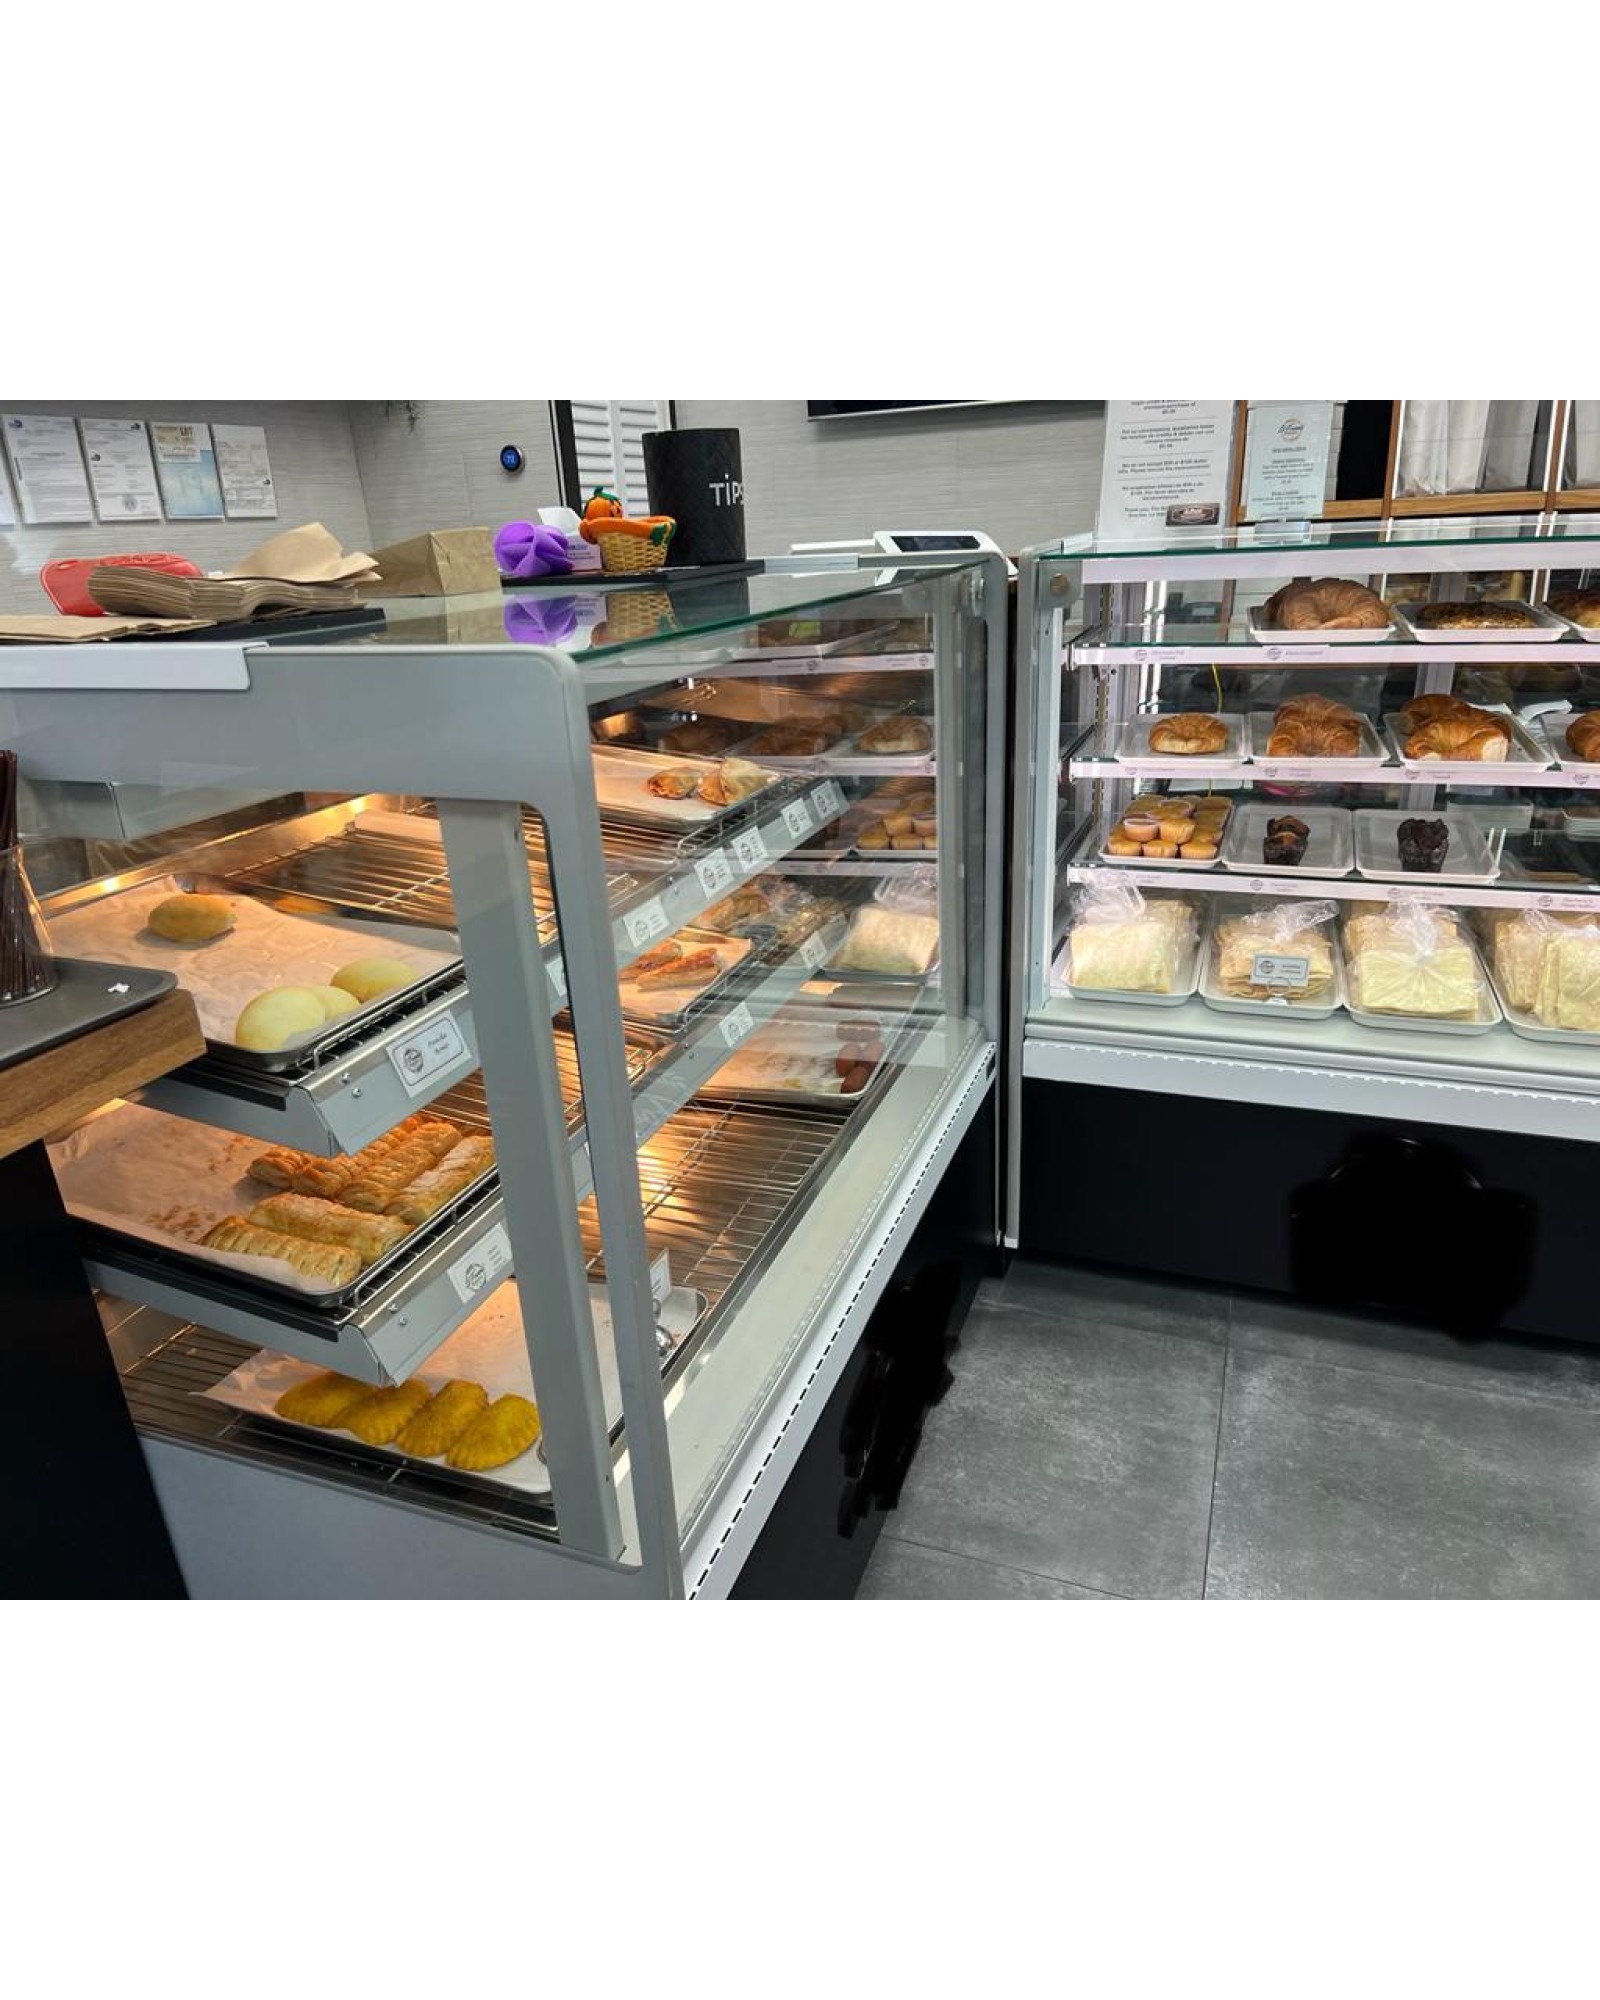 Bakery Case (Refrigerated 51")